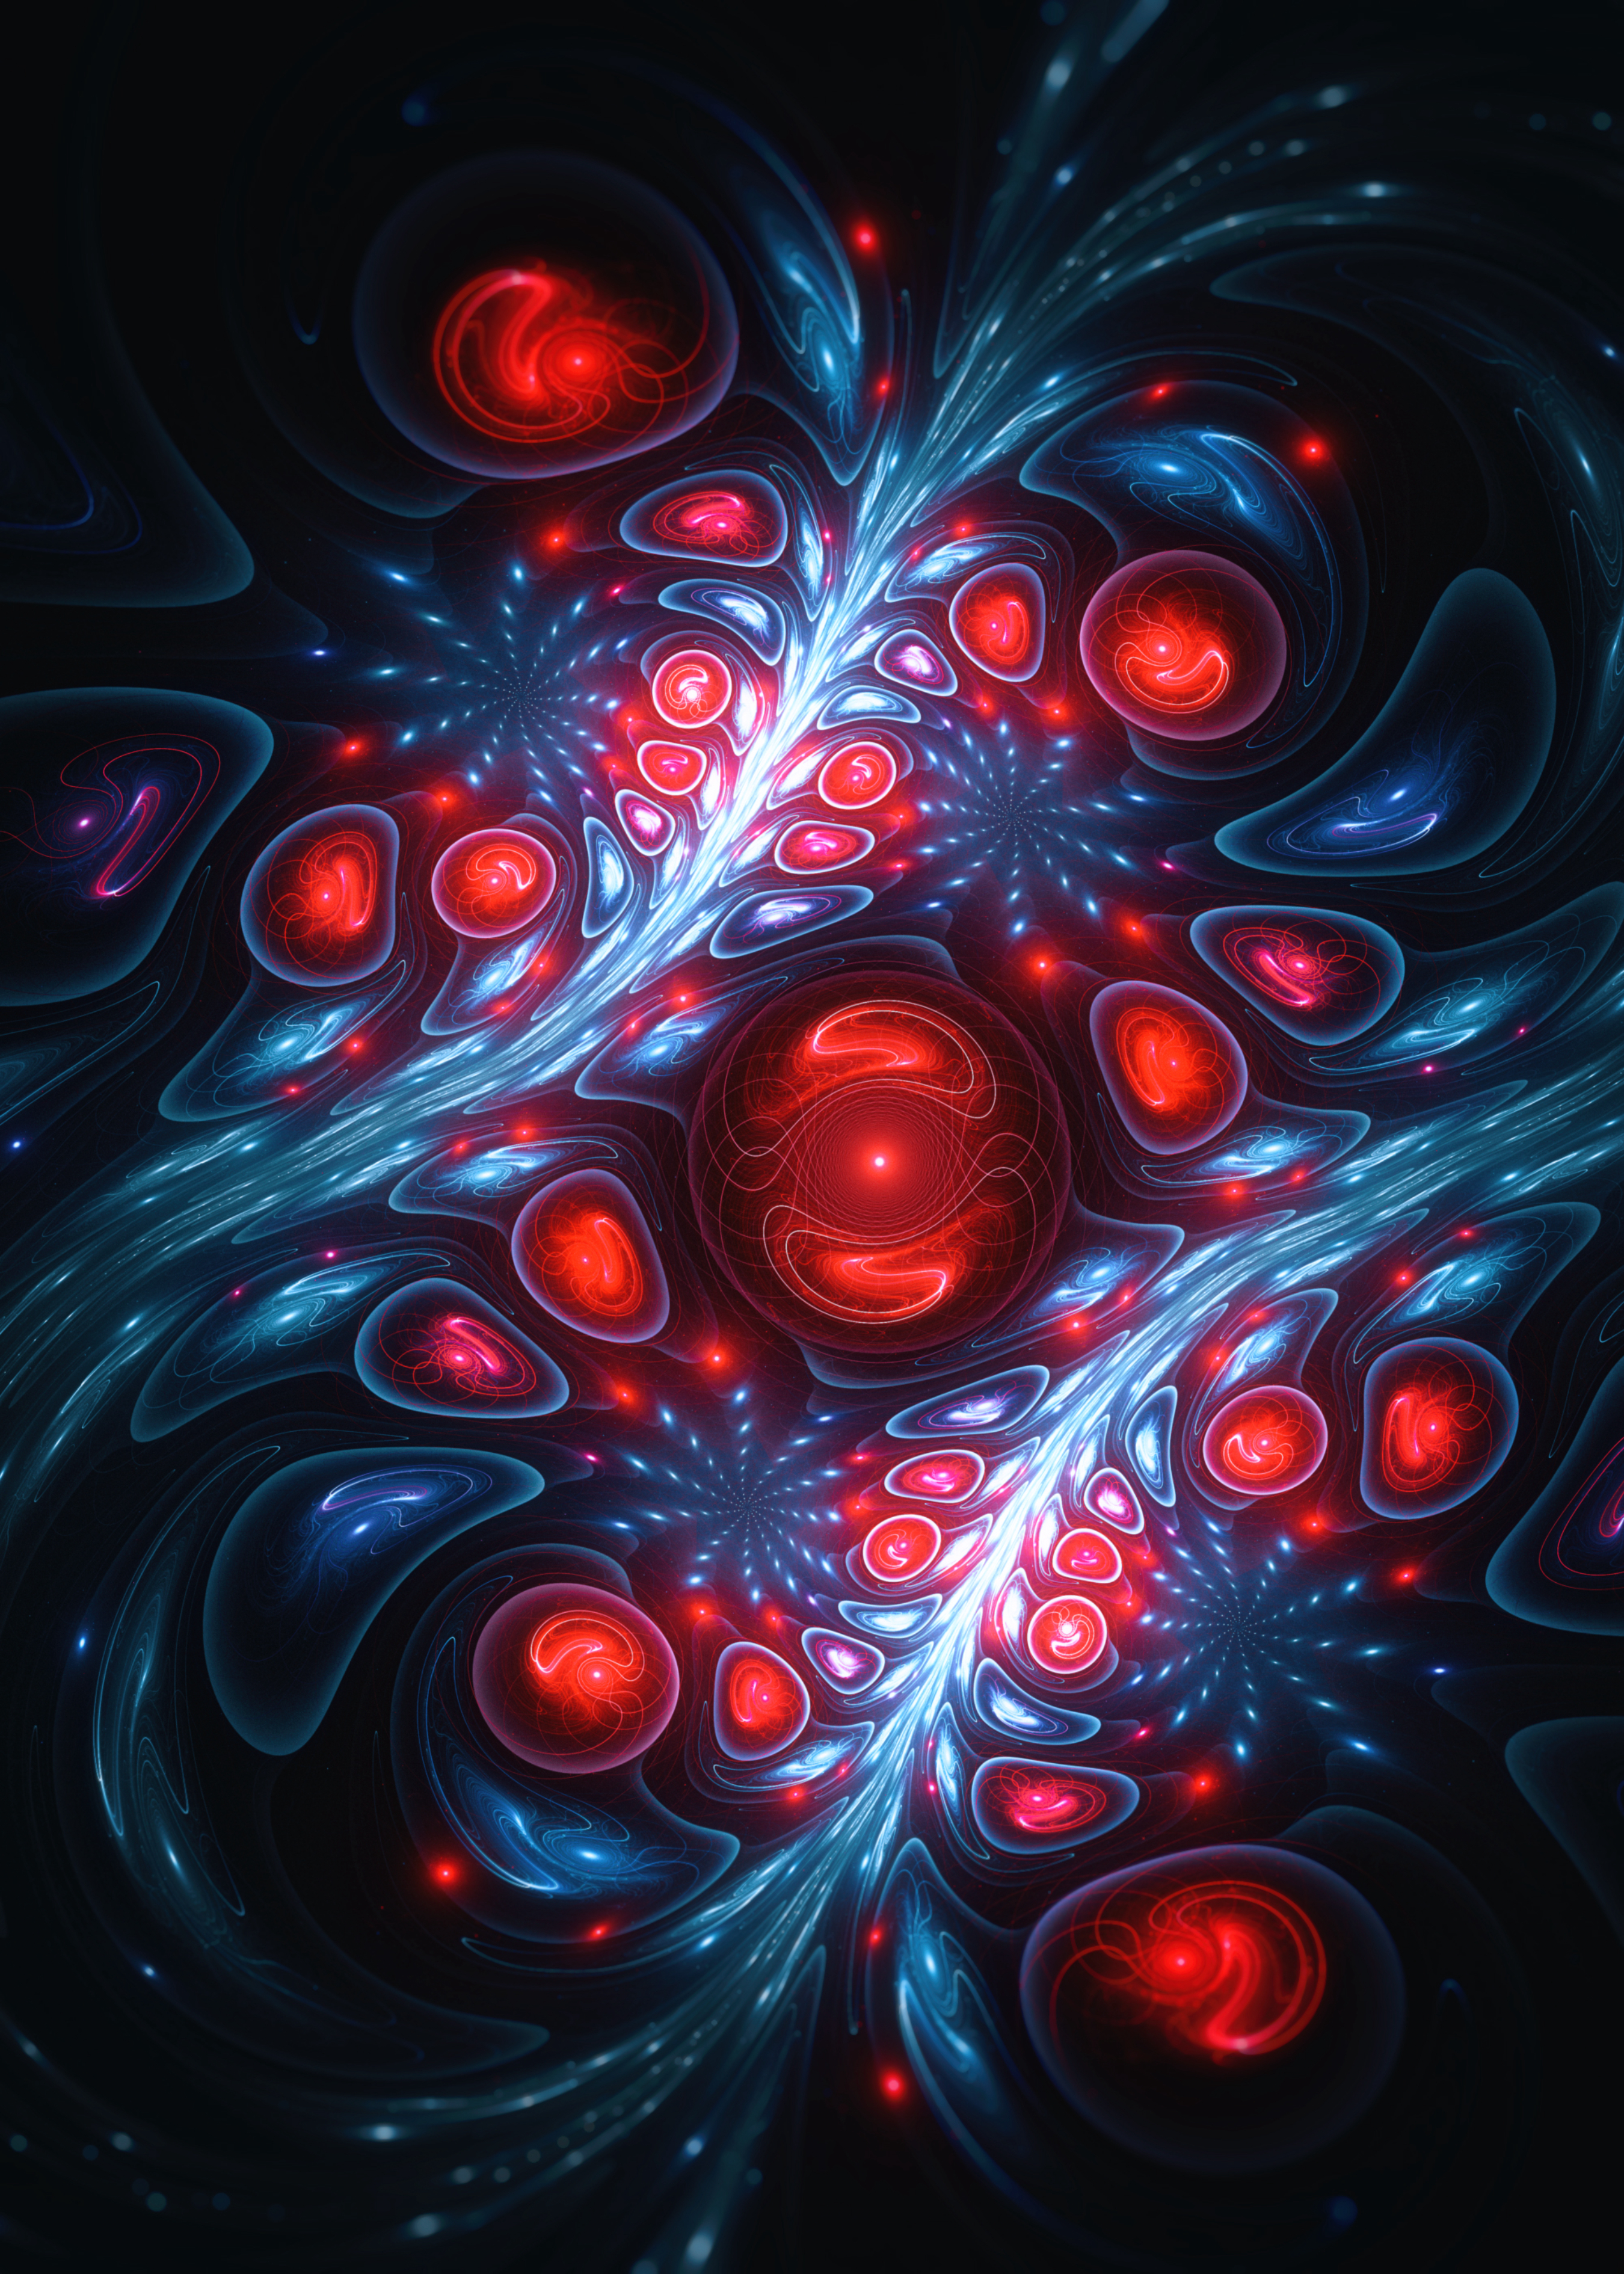 128173 download wallpaper fractal, dark, patterns, abstract, blue, red, circles screensavers and pictures for free